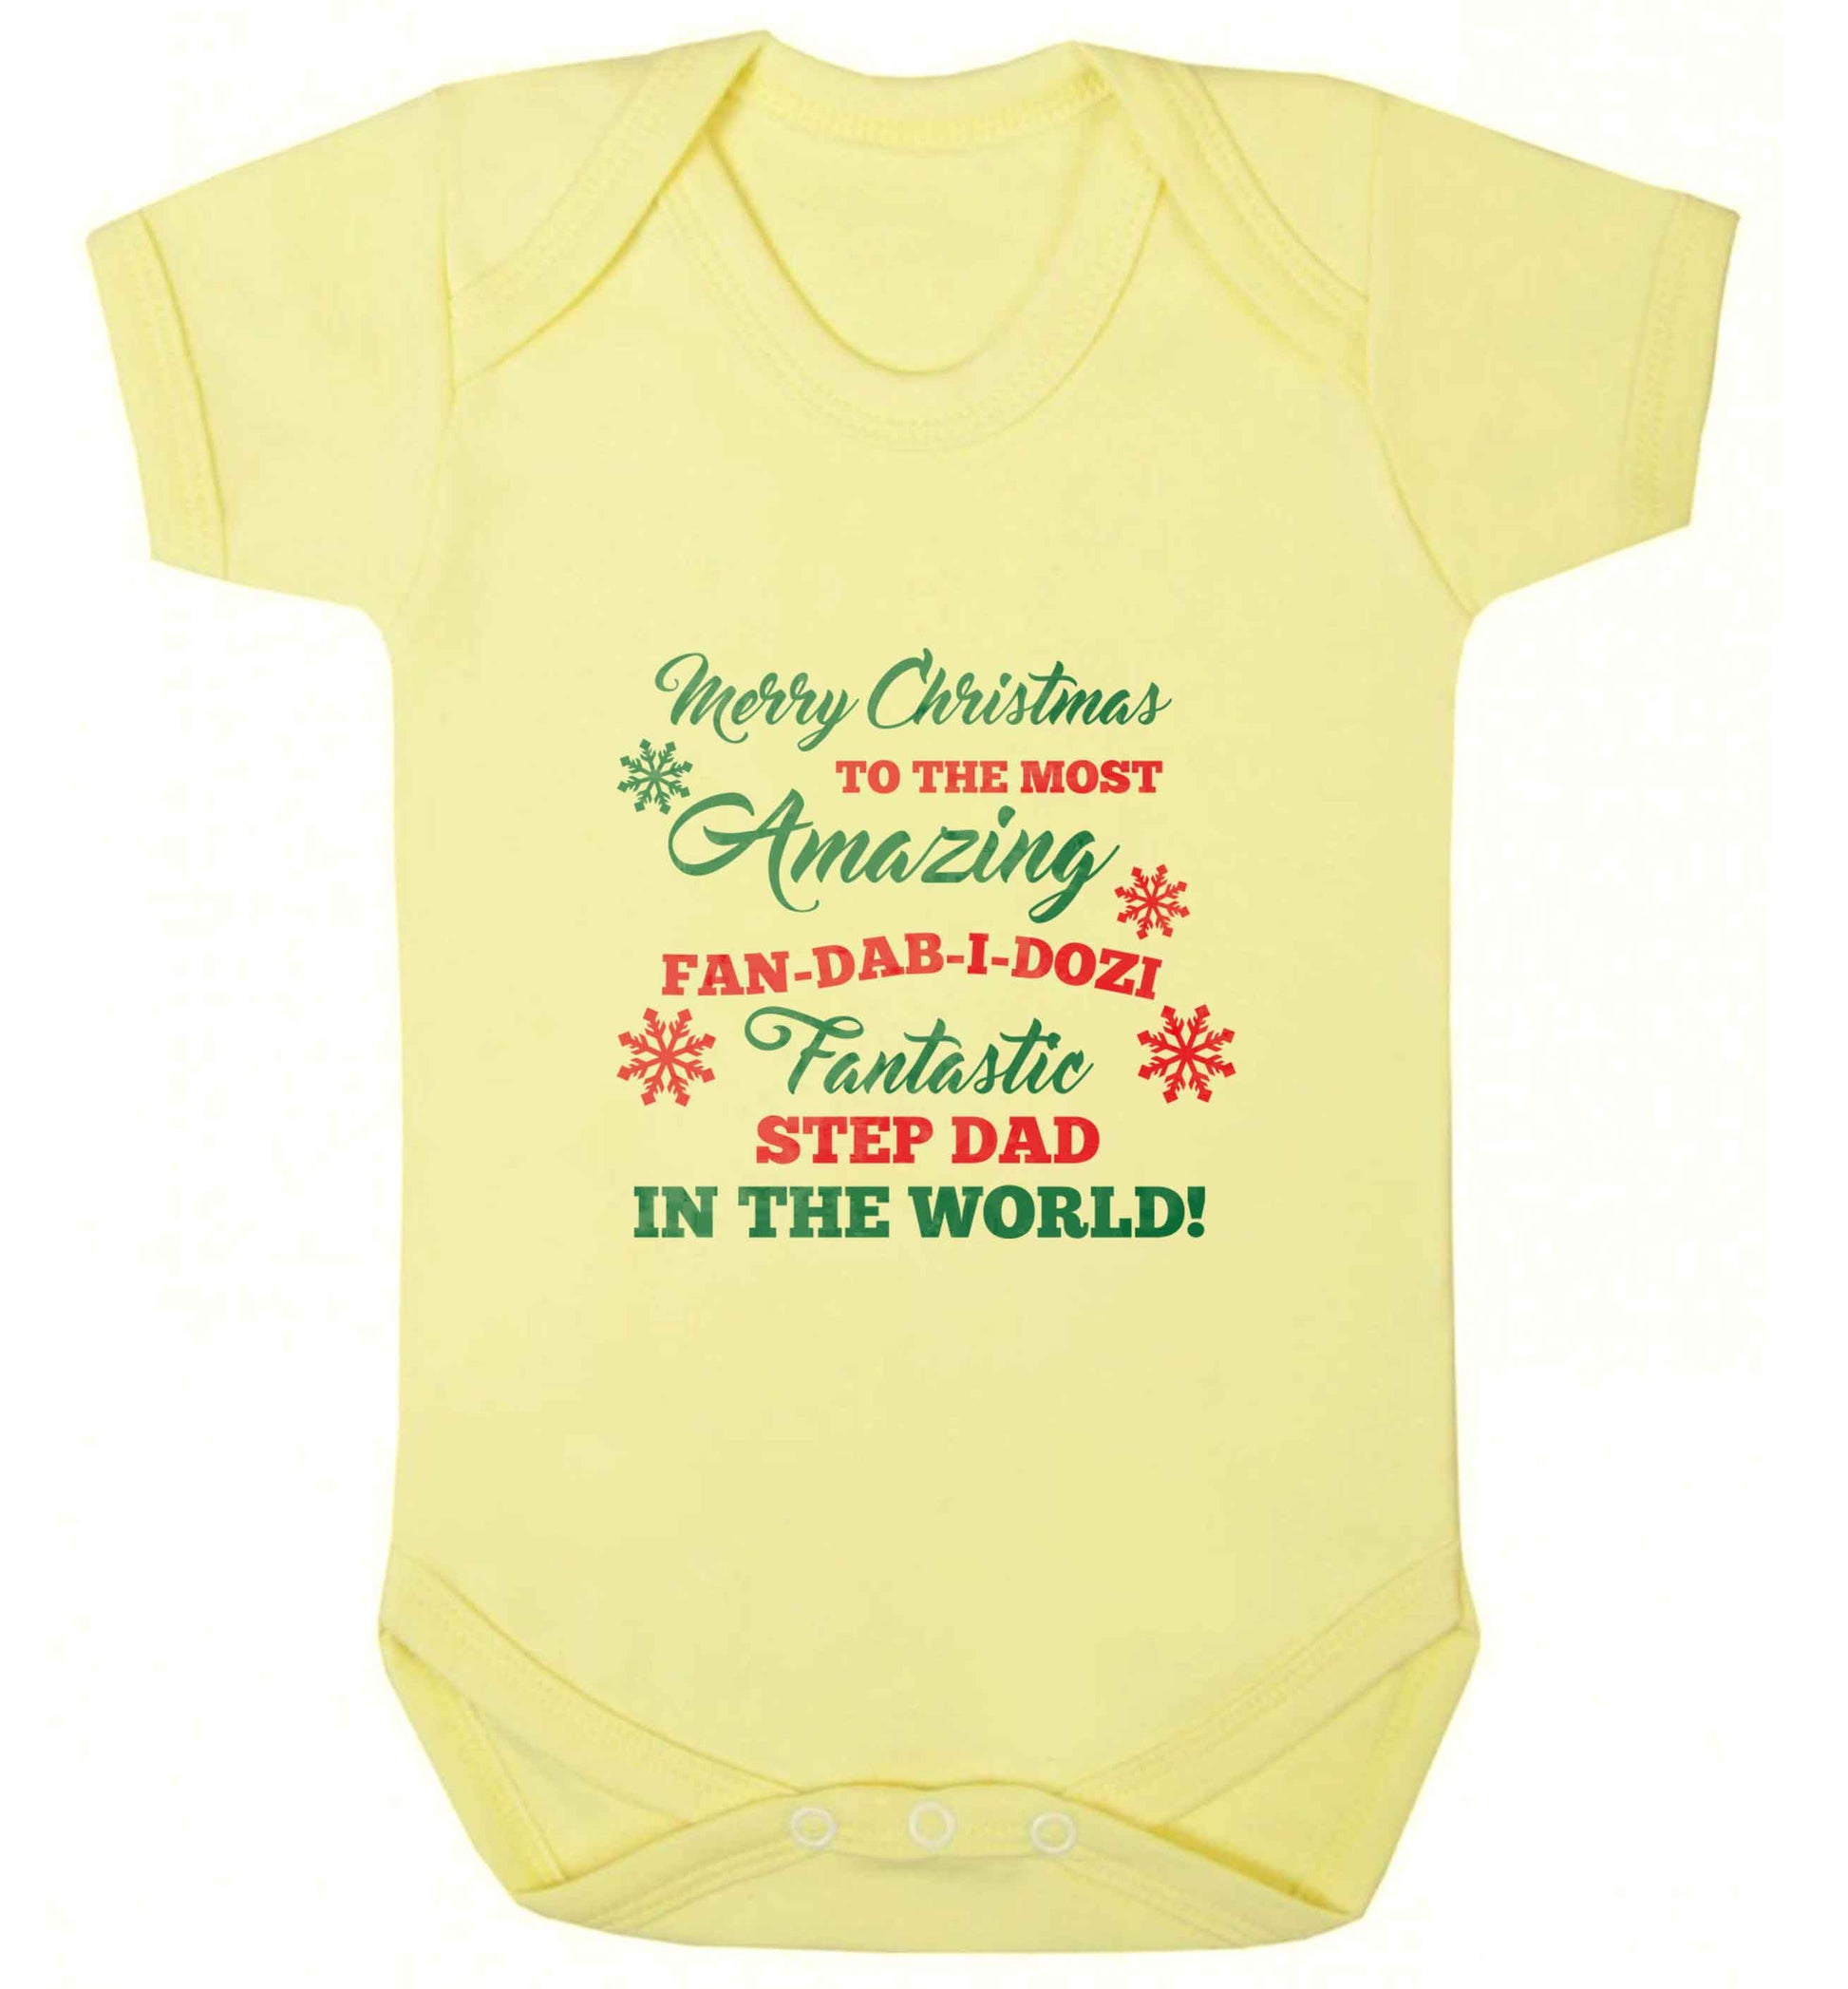 Merry Christmas to the most amazing fan-dab-i-dozi fantasic Step Dad in the world baby vest pale yellow 18-24 months